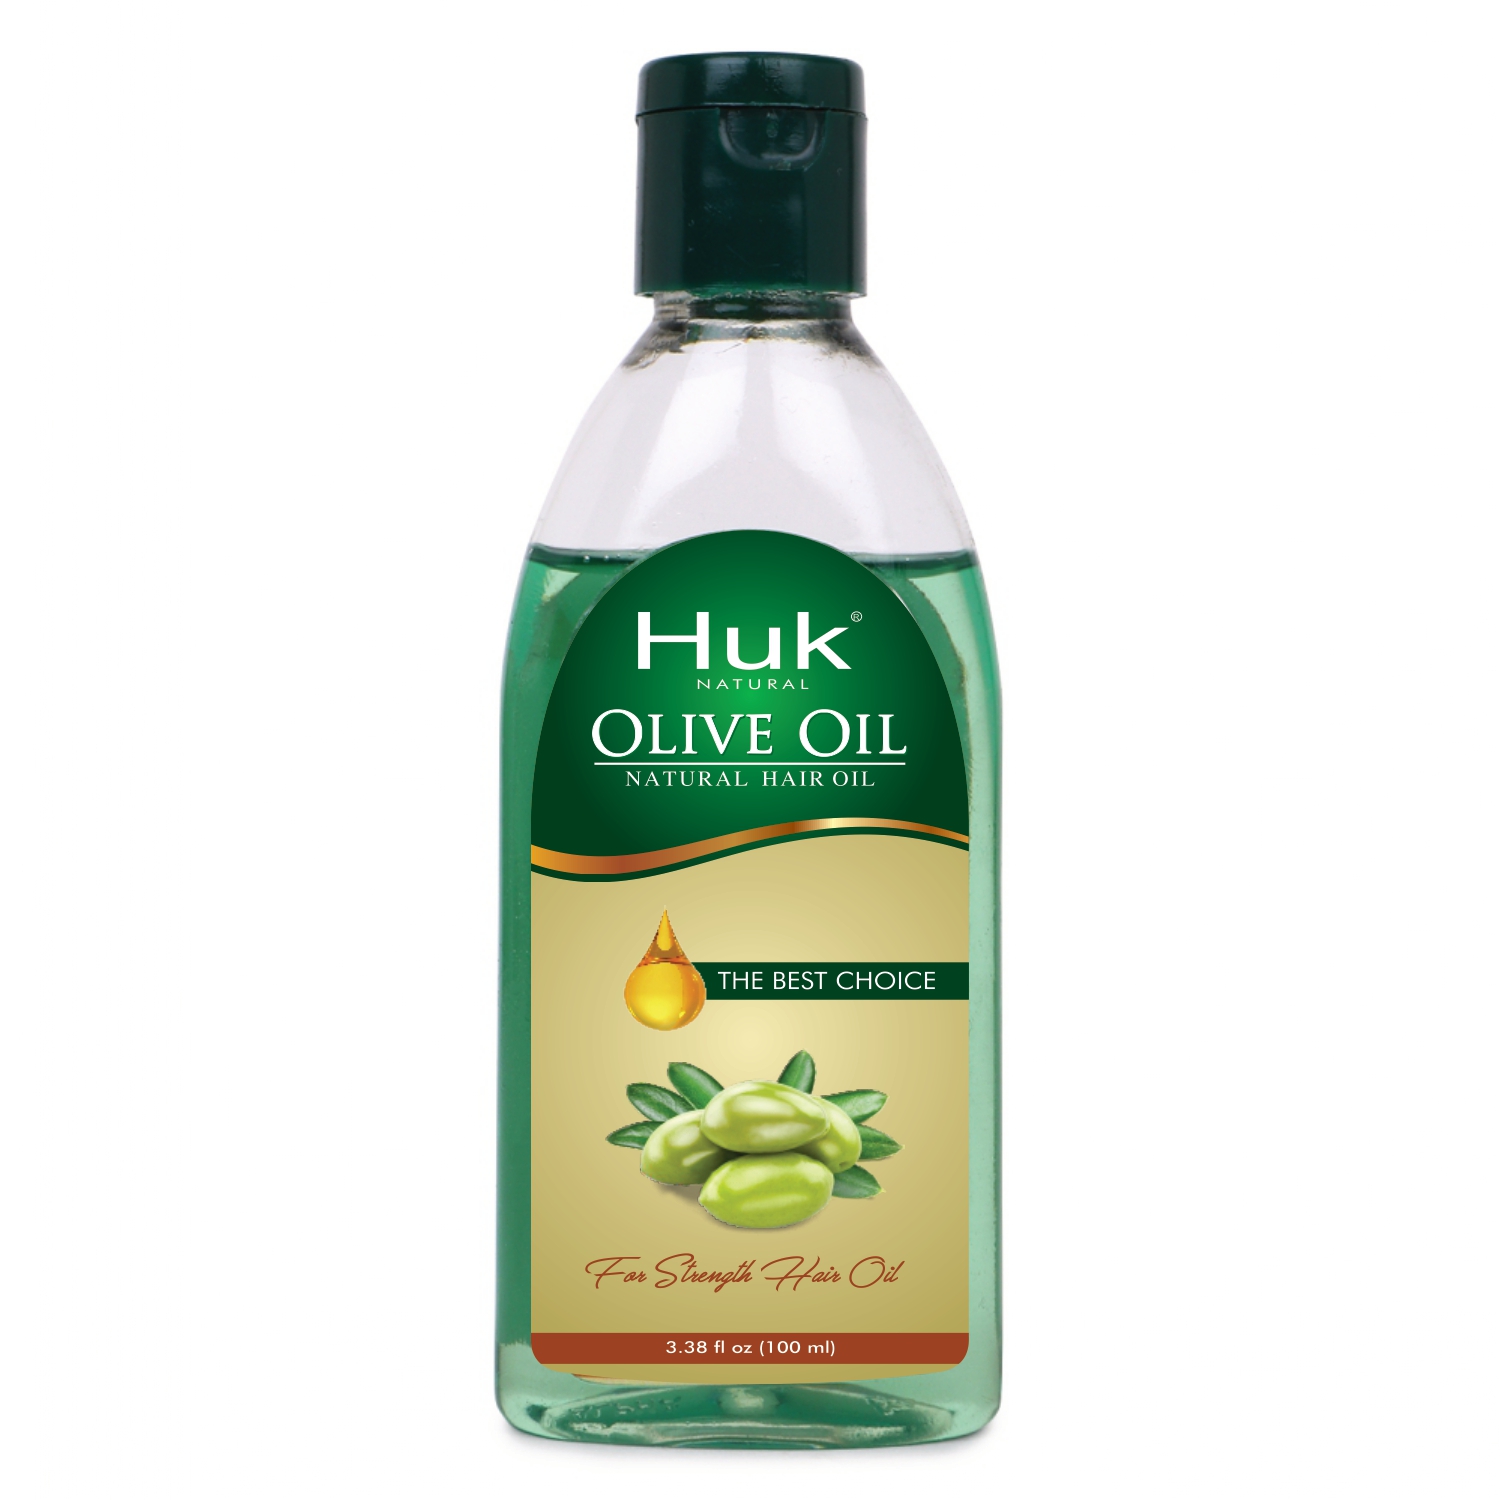 Huk Olive Hair Oil 100ml from Huk